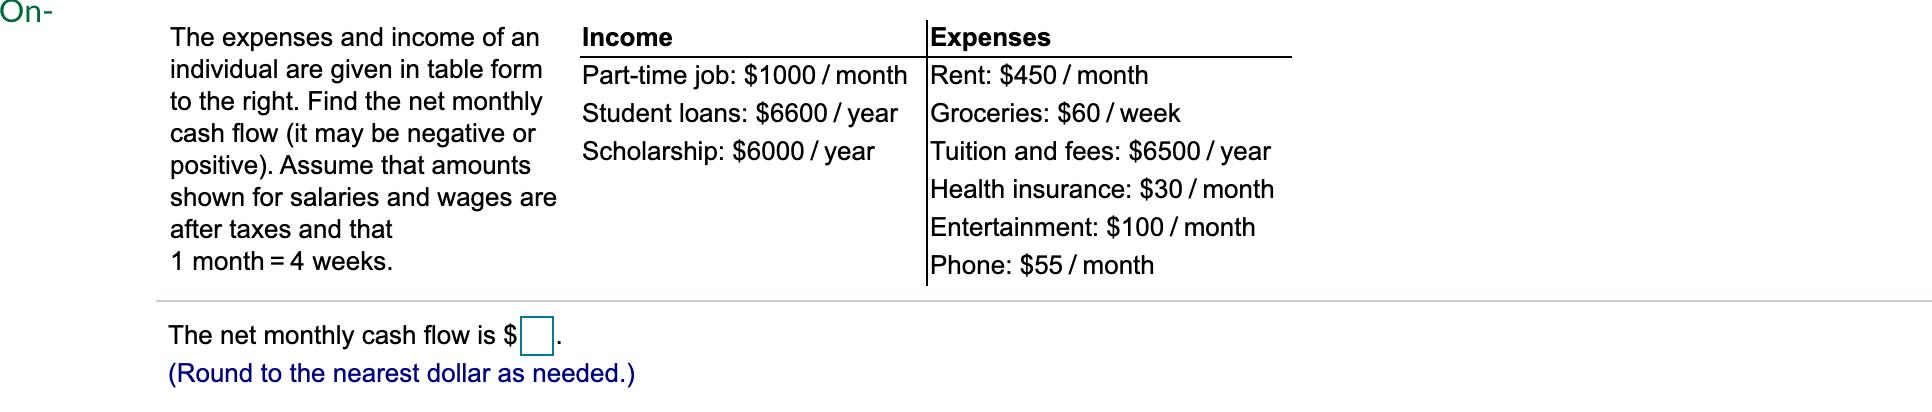 On- The expenses and income of an individual are given in table form to the right. Find the net monthly cash flow (it may be